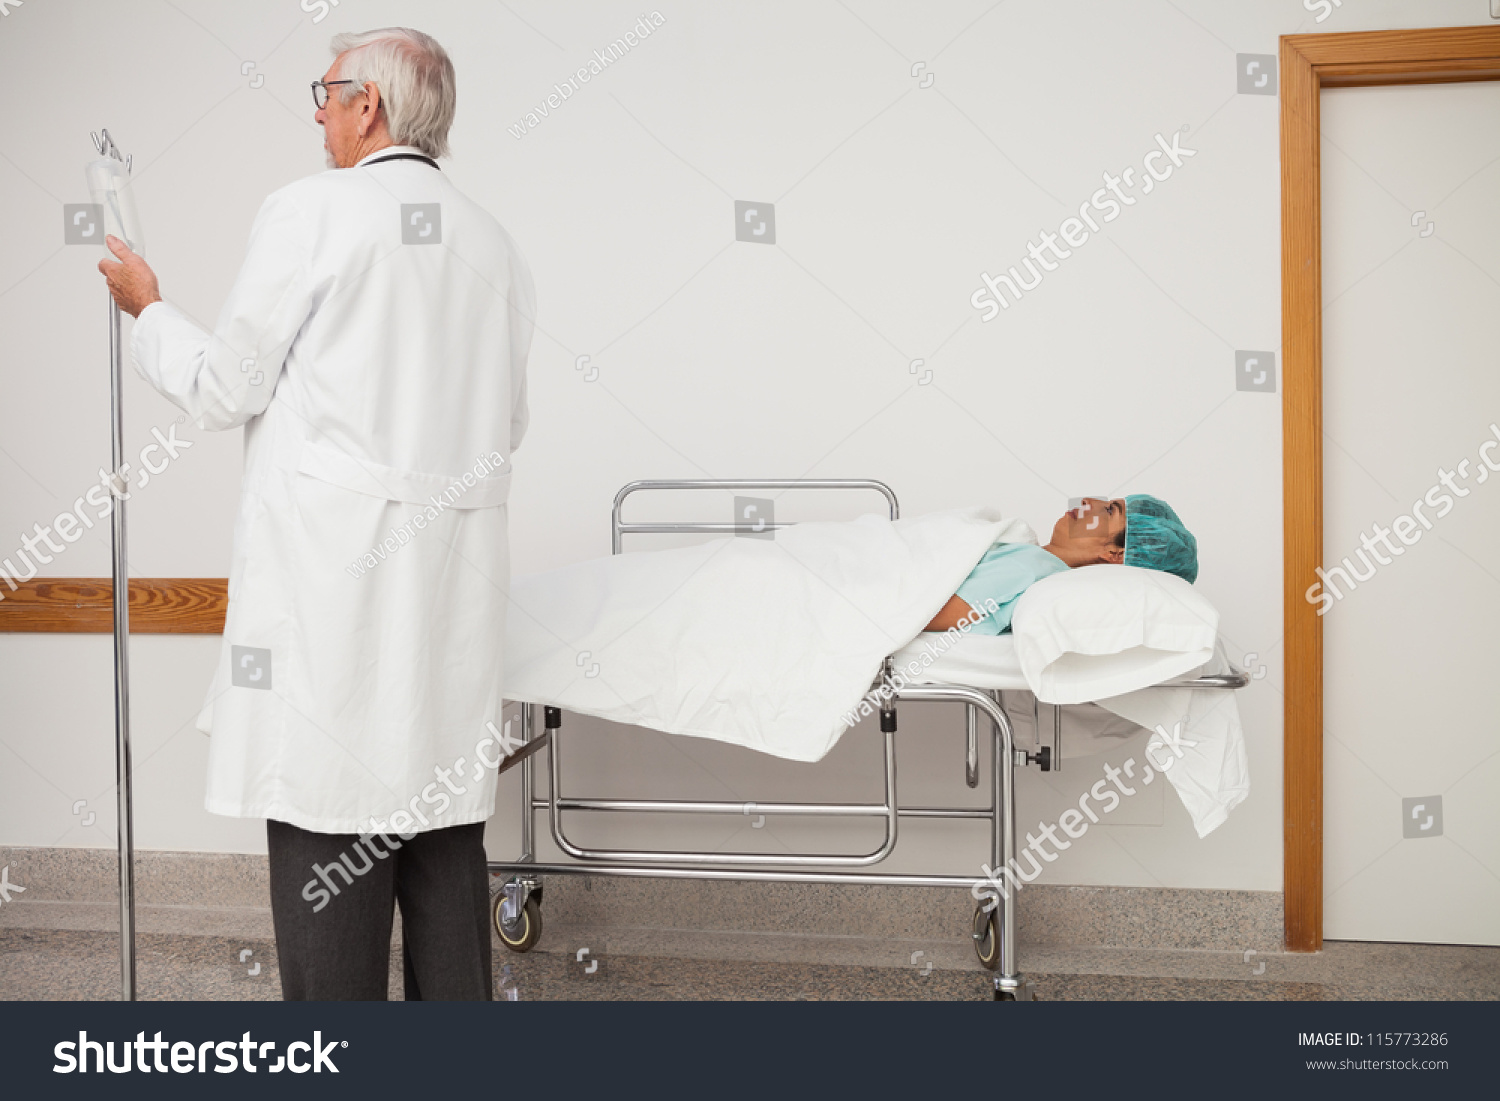 Doctor Adjusting Patients Iv Drip Hospital Stock Photo Edit Now 115773286